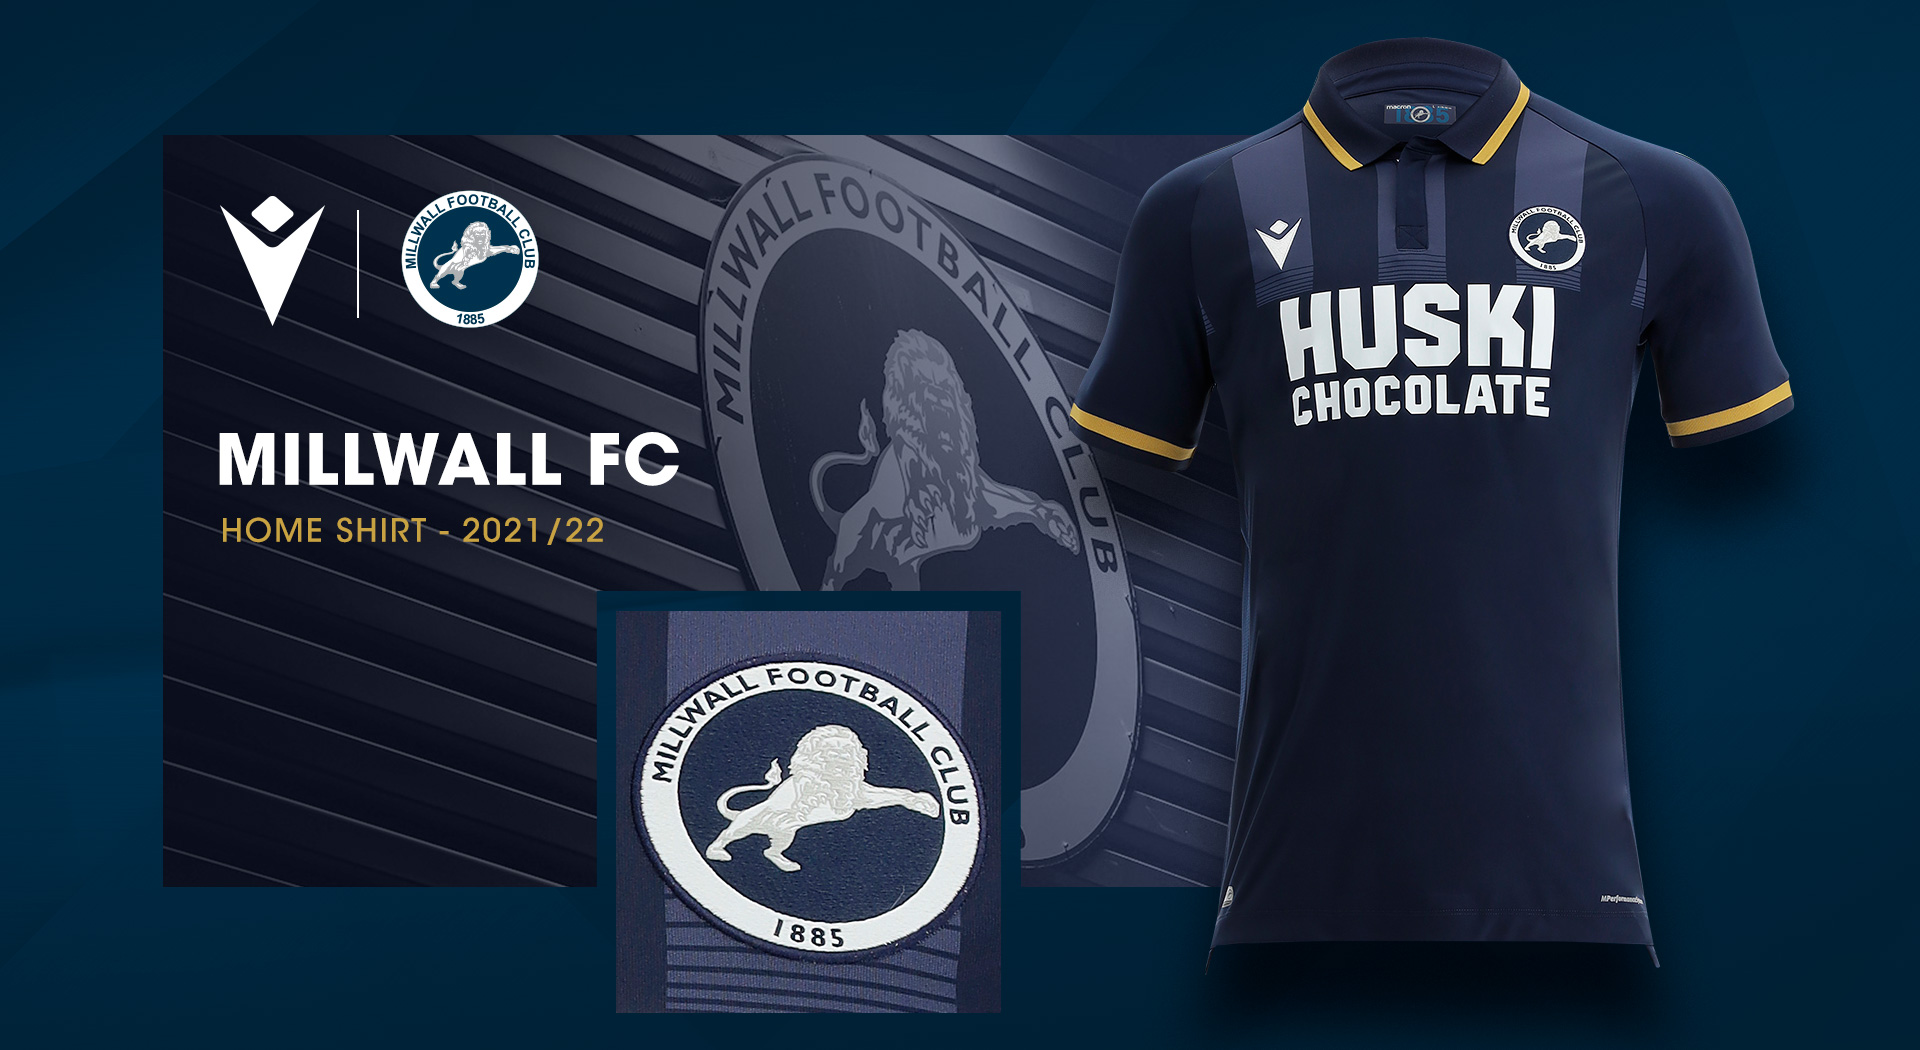 Blue & Gold in new Macronmade Millwall FC home kit!